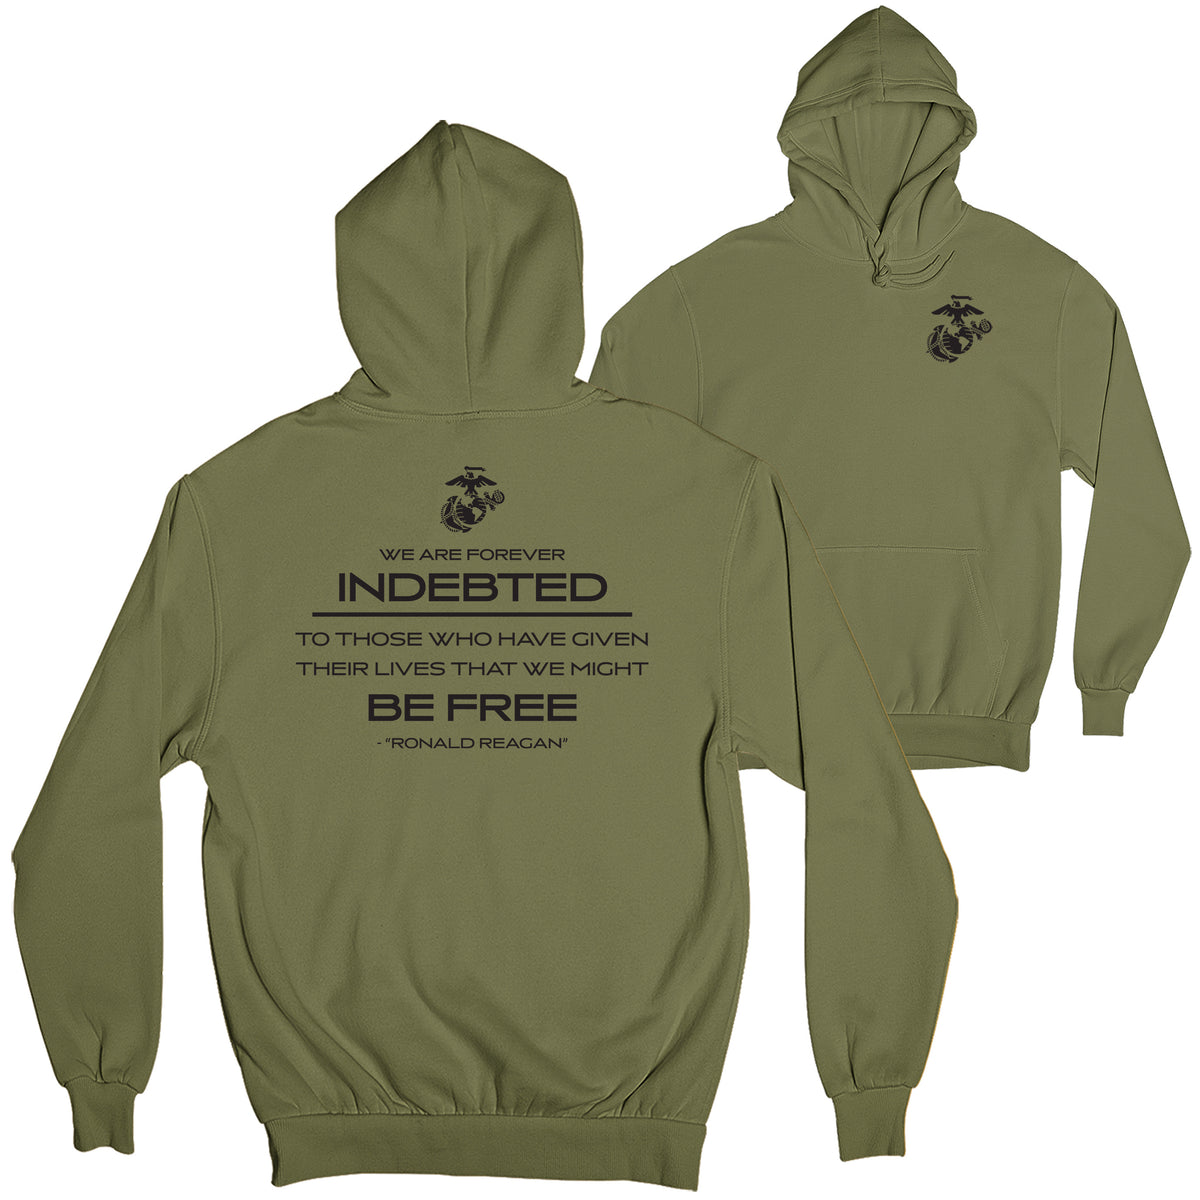 Ronald Reagan Indebted Quote 2-Sided Hoodie